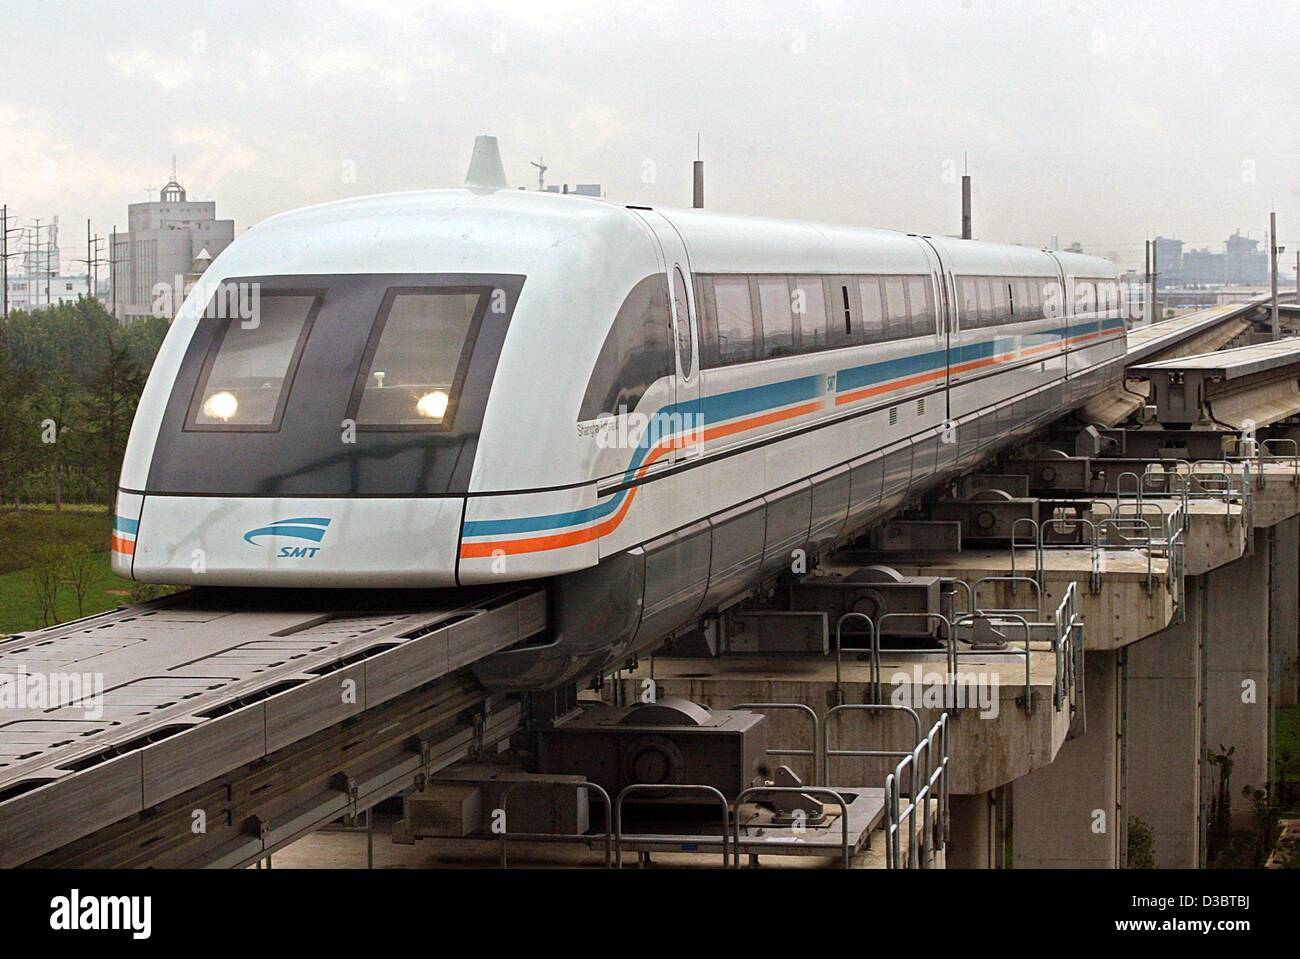 dpa) - The magnetic levitation (maglev) train Transrapid floats on a track  into the train station in Shanghai, 15 September 2003. The maglev, built  and designed by German engineering giants Siemens and